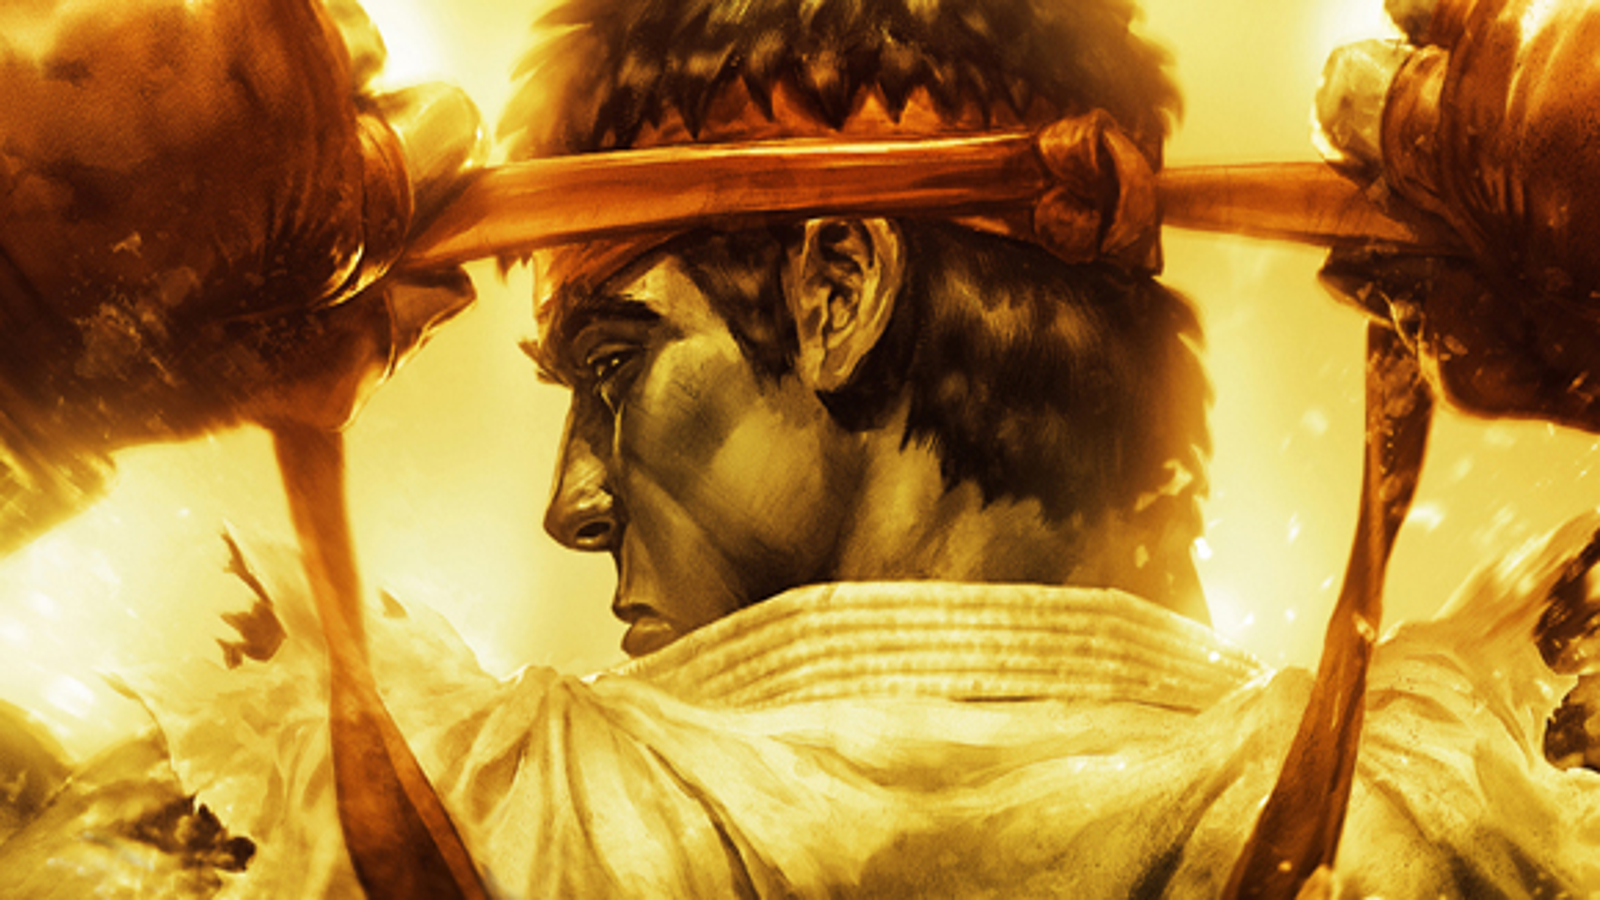 Ultra Street Fighter 4 is getting a crazy new 'Omega Mode' (corrected) -  Polygon